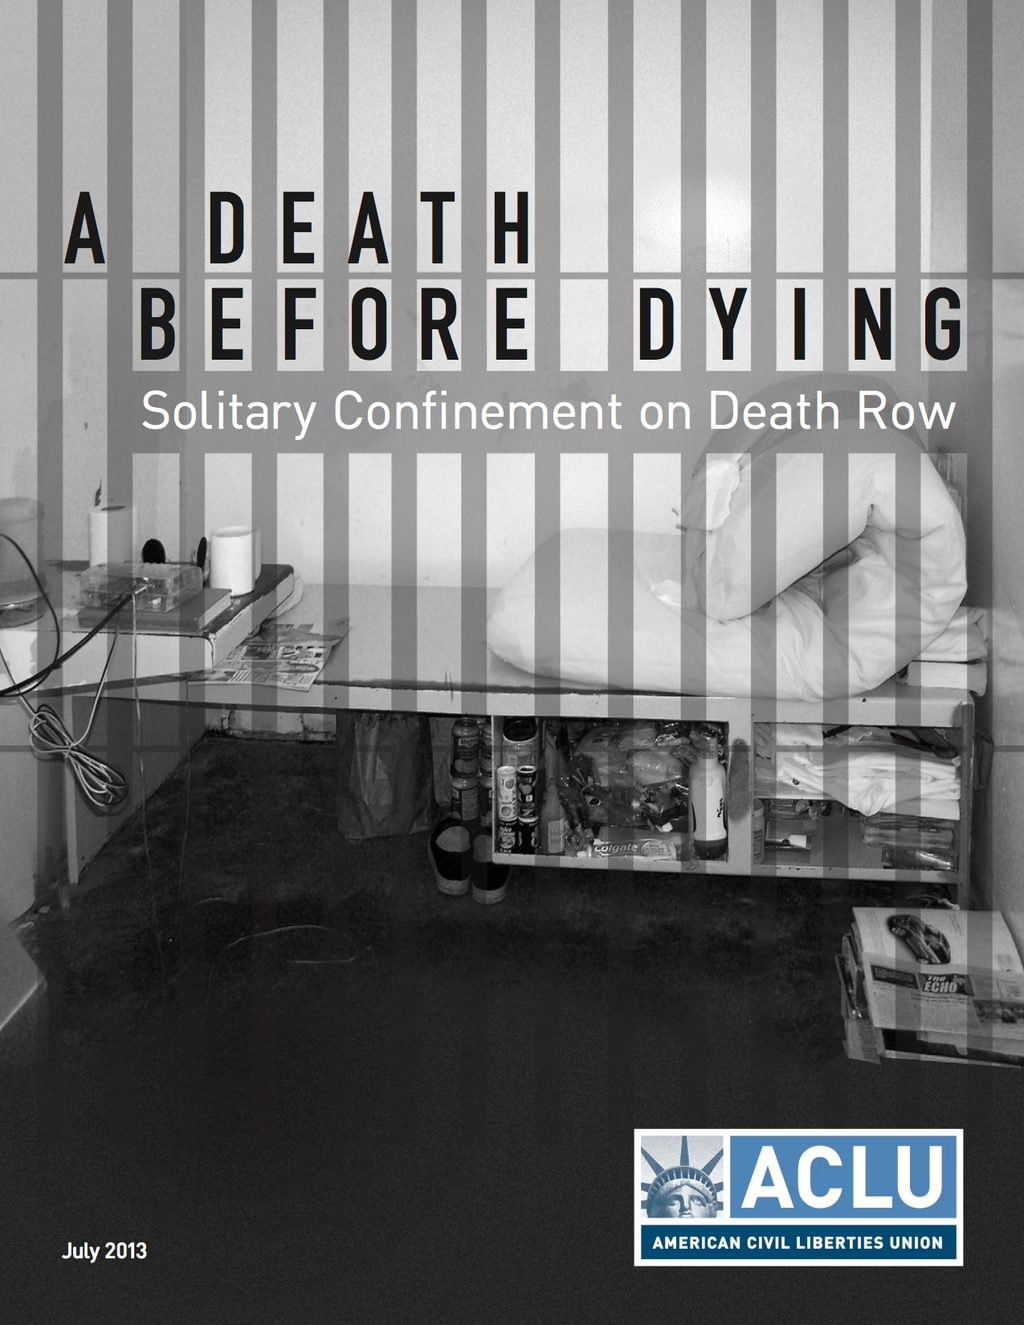 STUDIES: "A Death Before Dying: Solitary Confinement on Death Row"